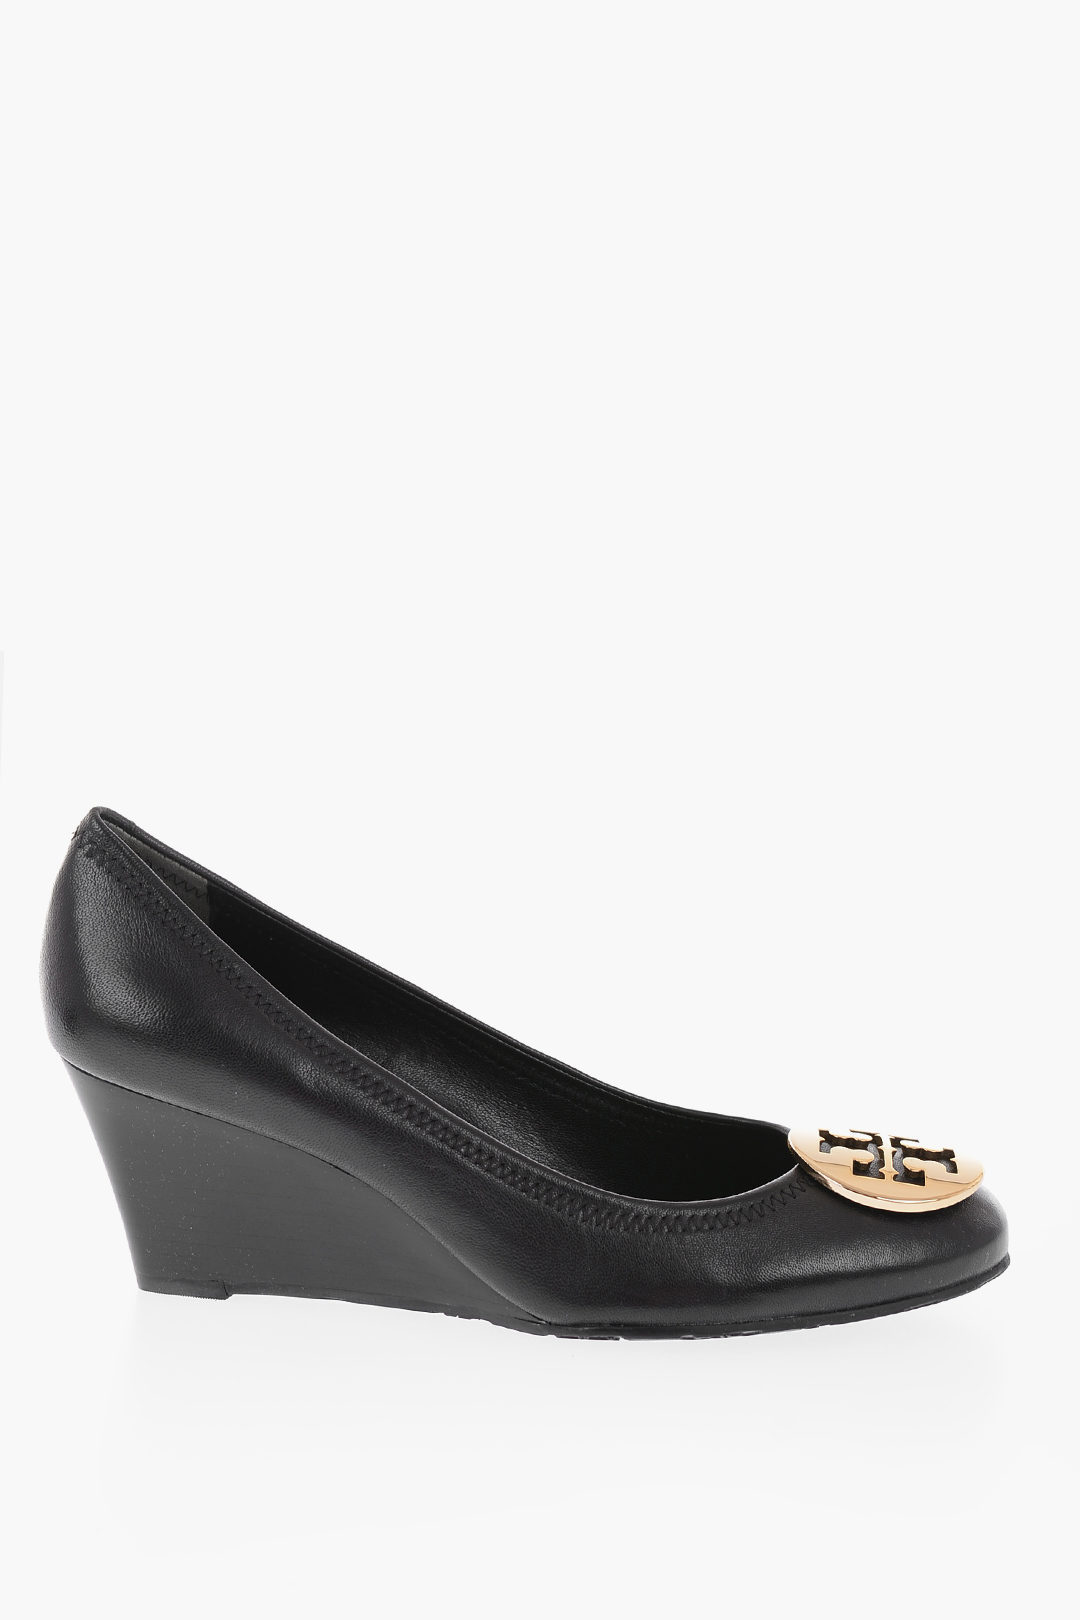 Tory Burch  leather SALLY Wedge pumps women - Glamood Outlet